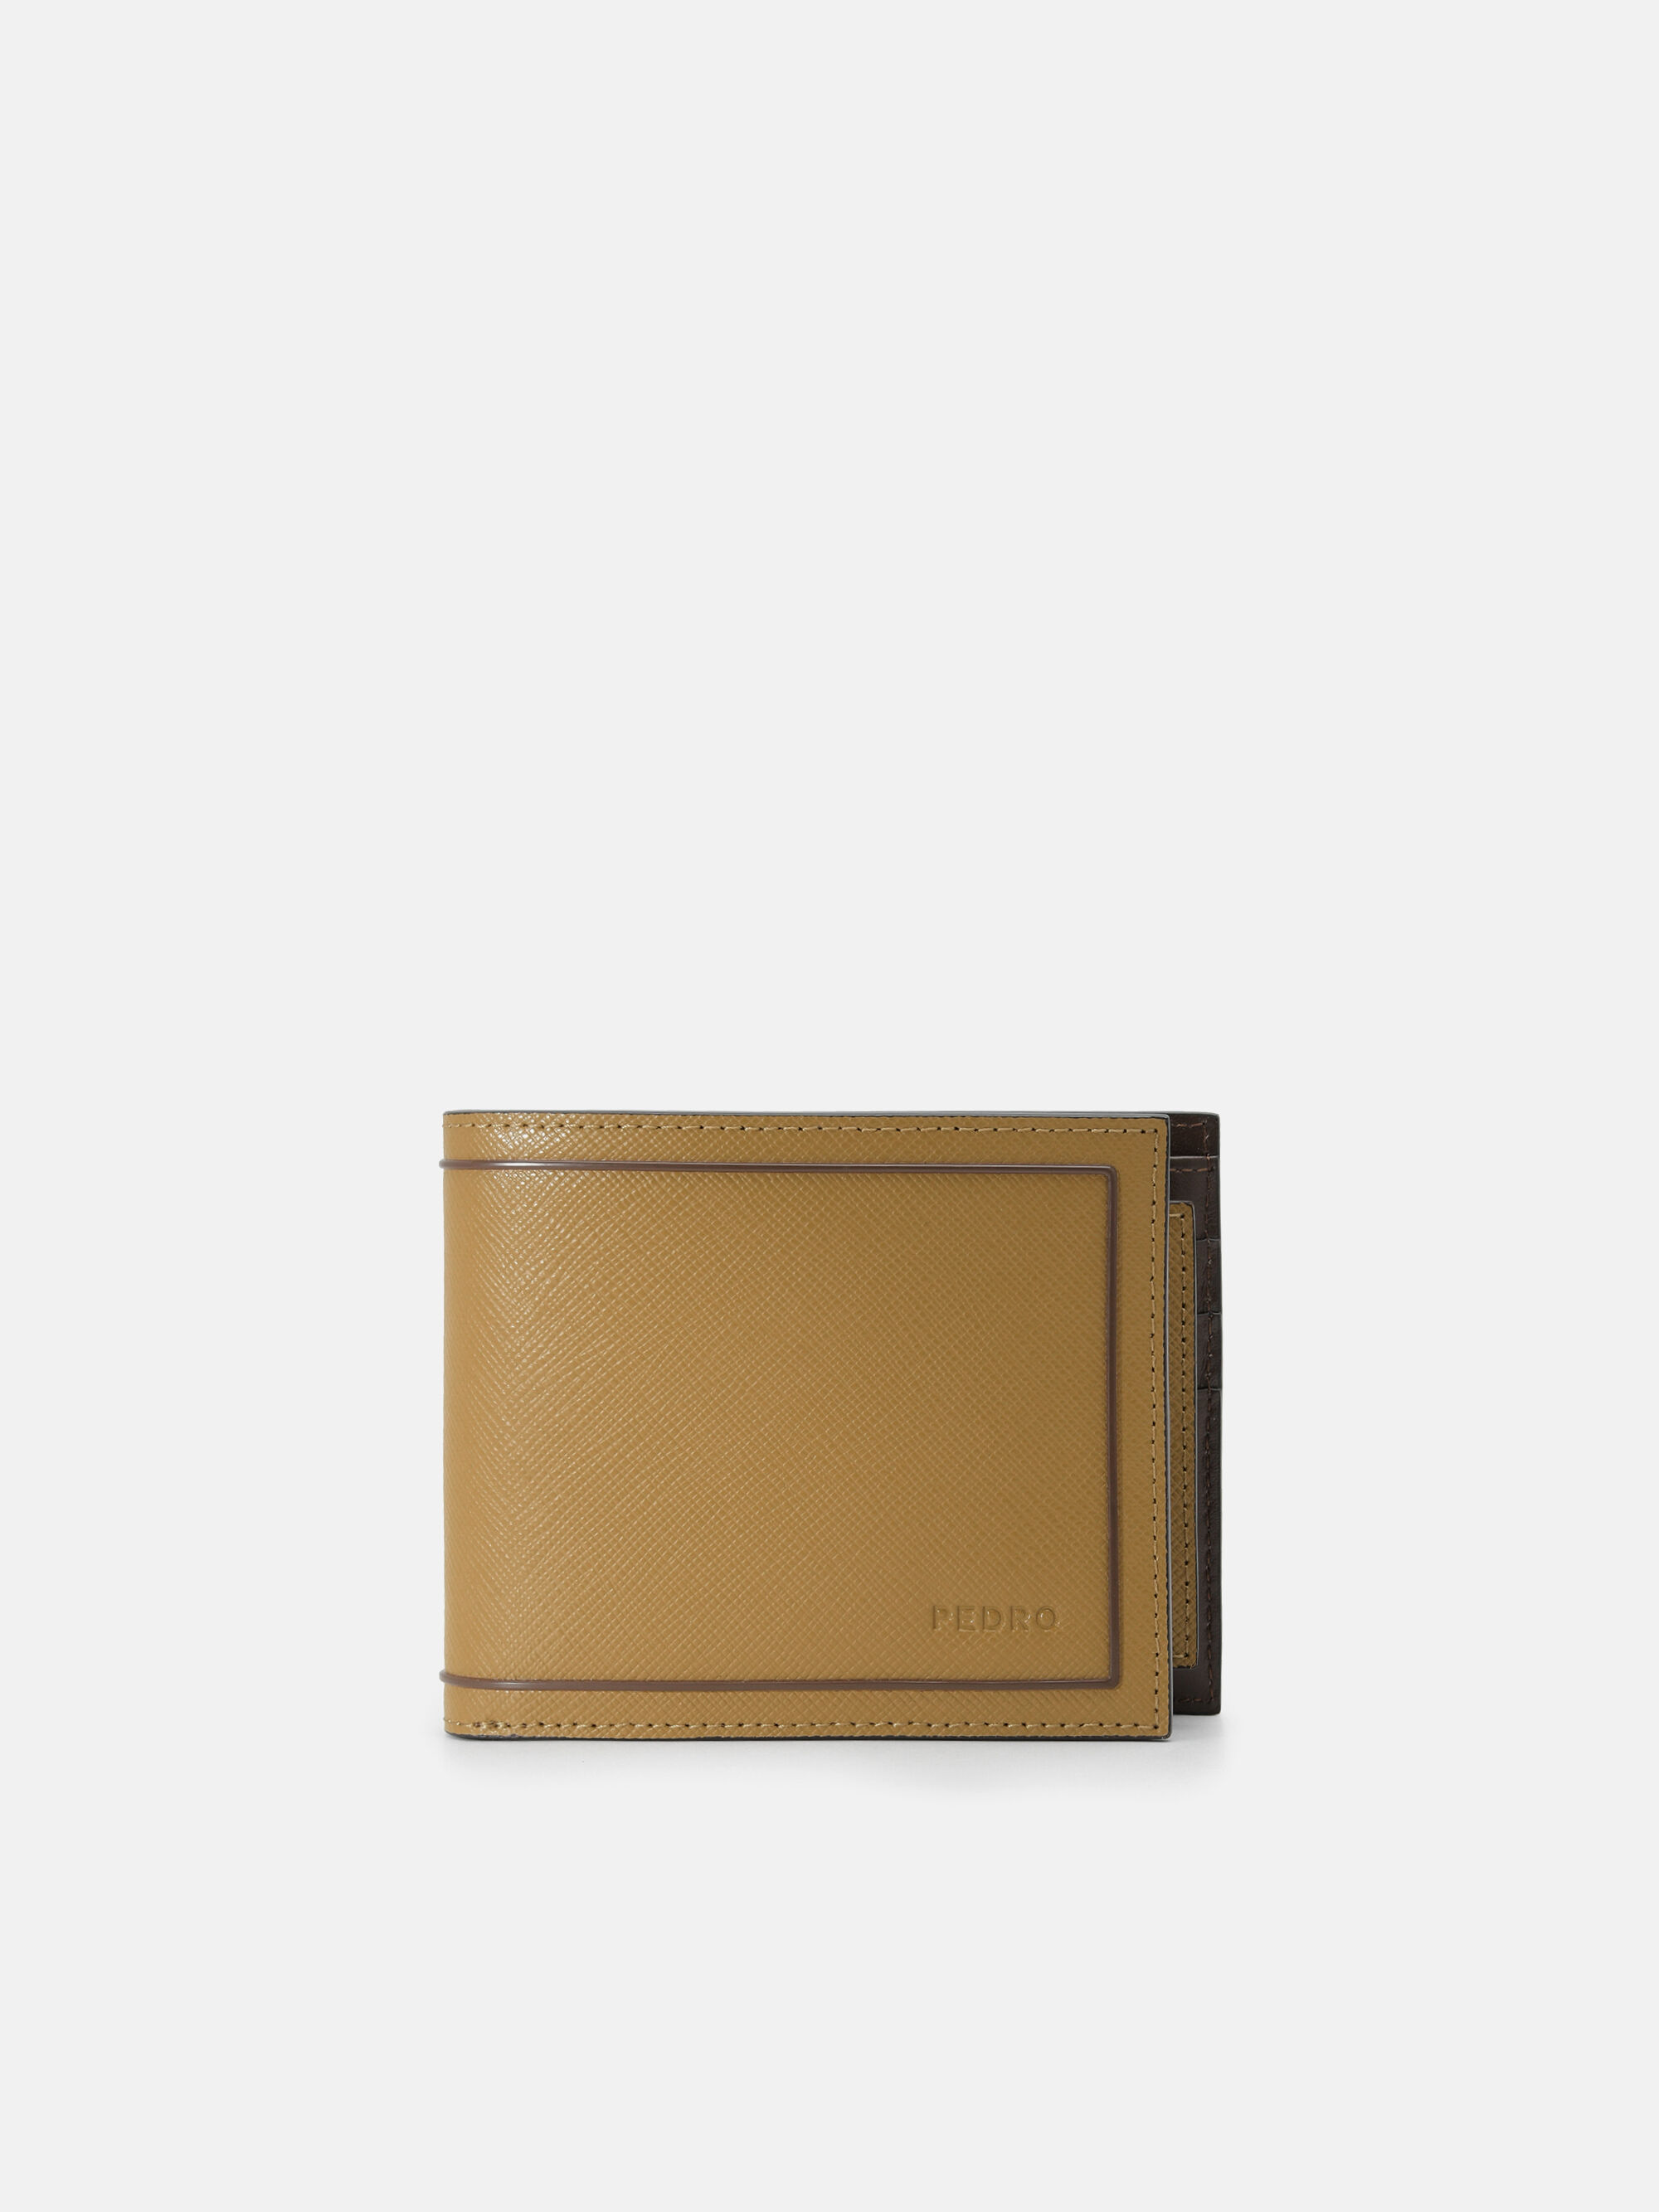 Saffiano Leather Bi-Fold Wallet with Insert, Cognac